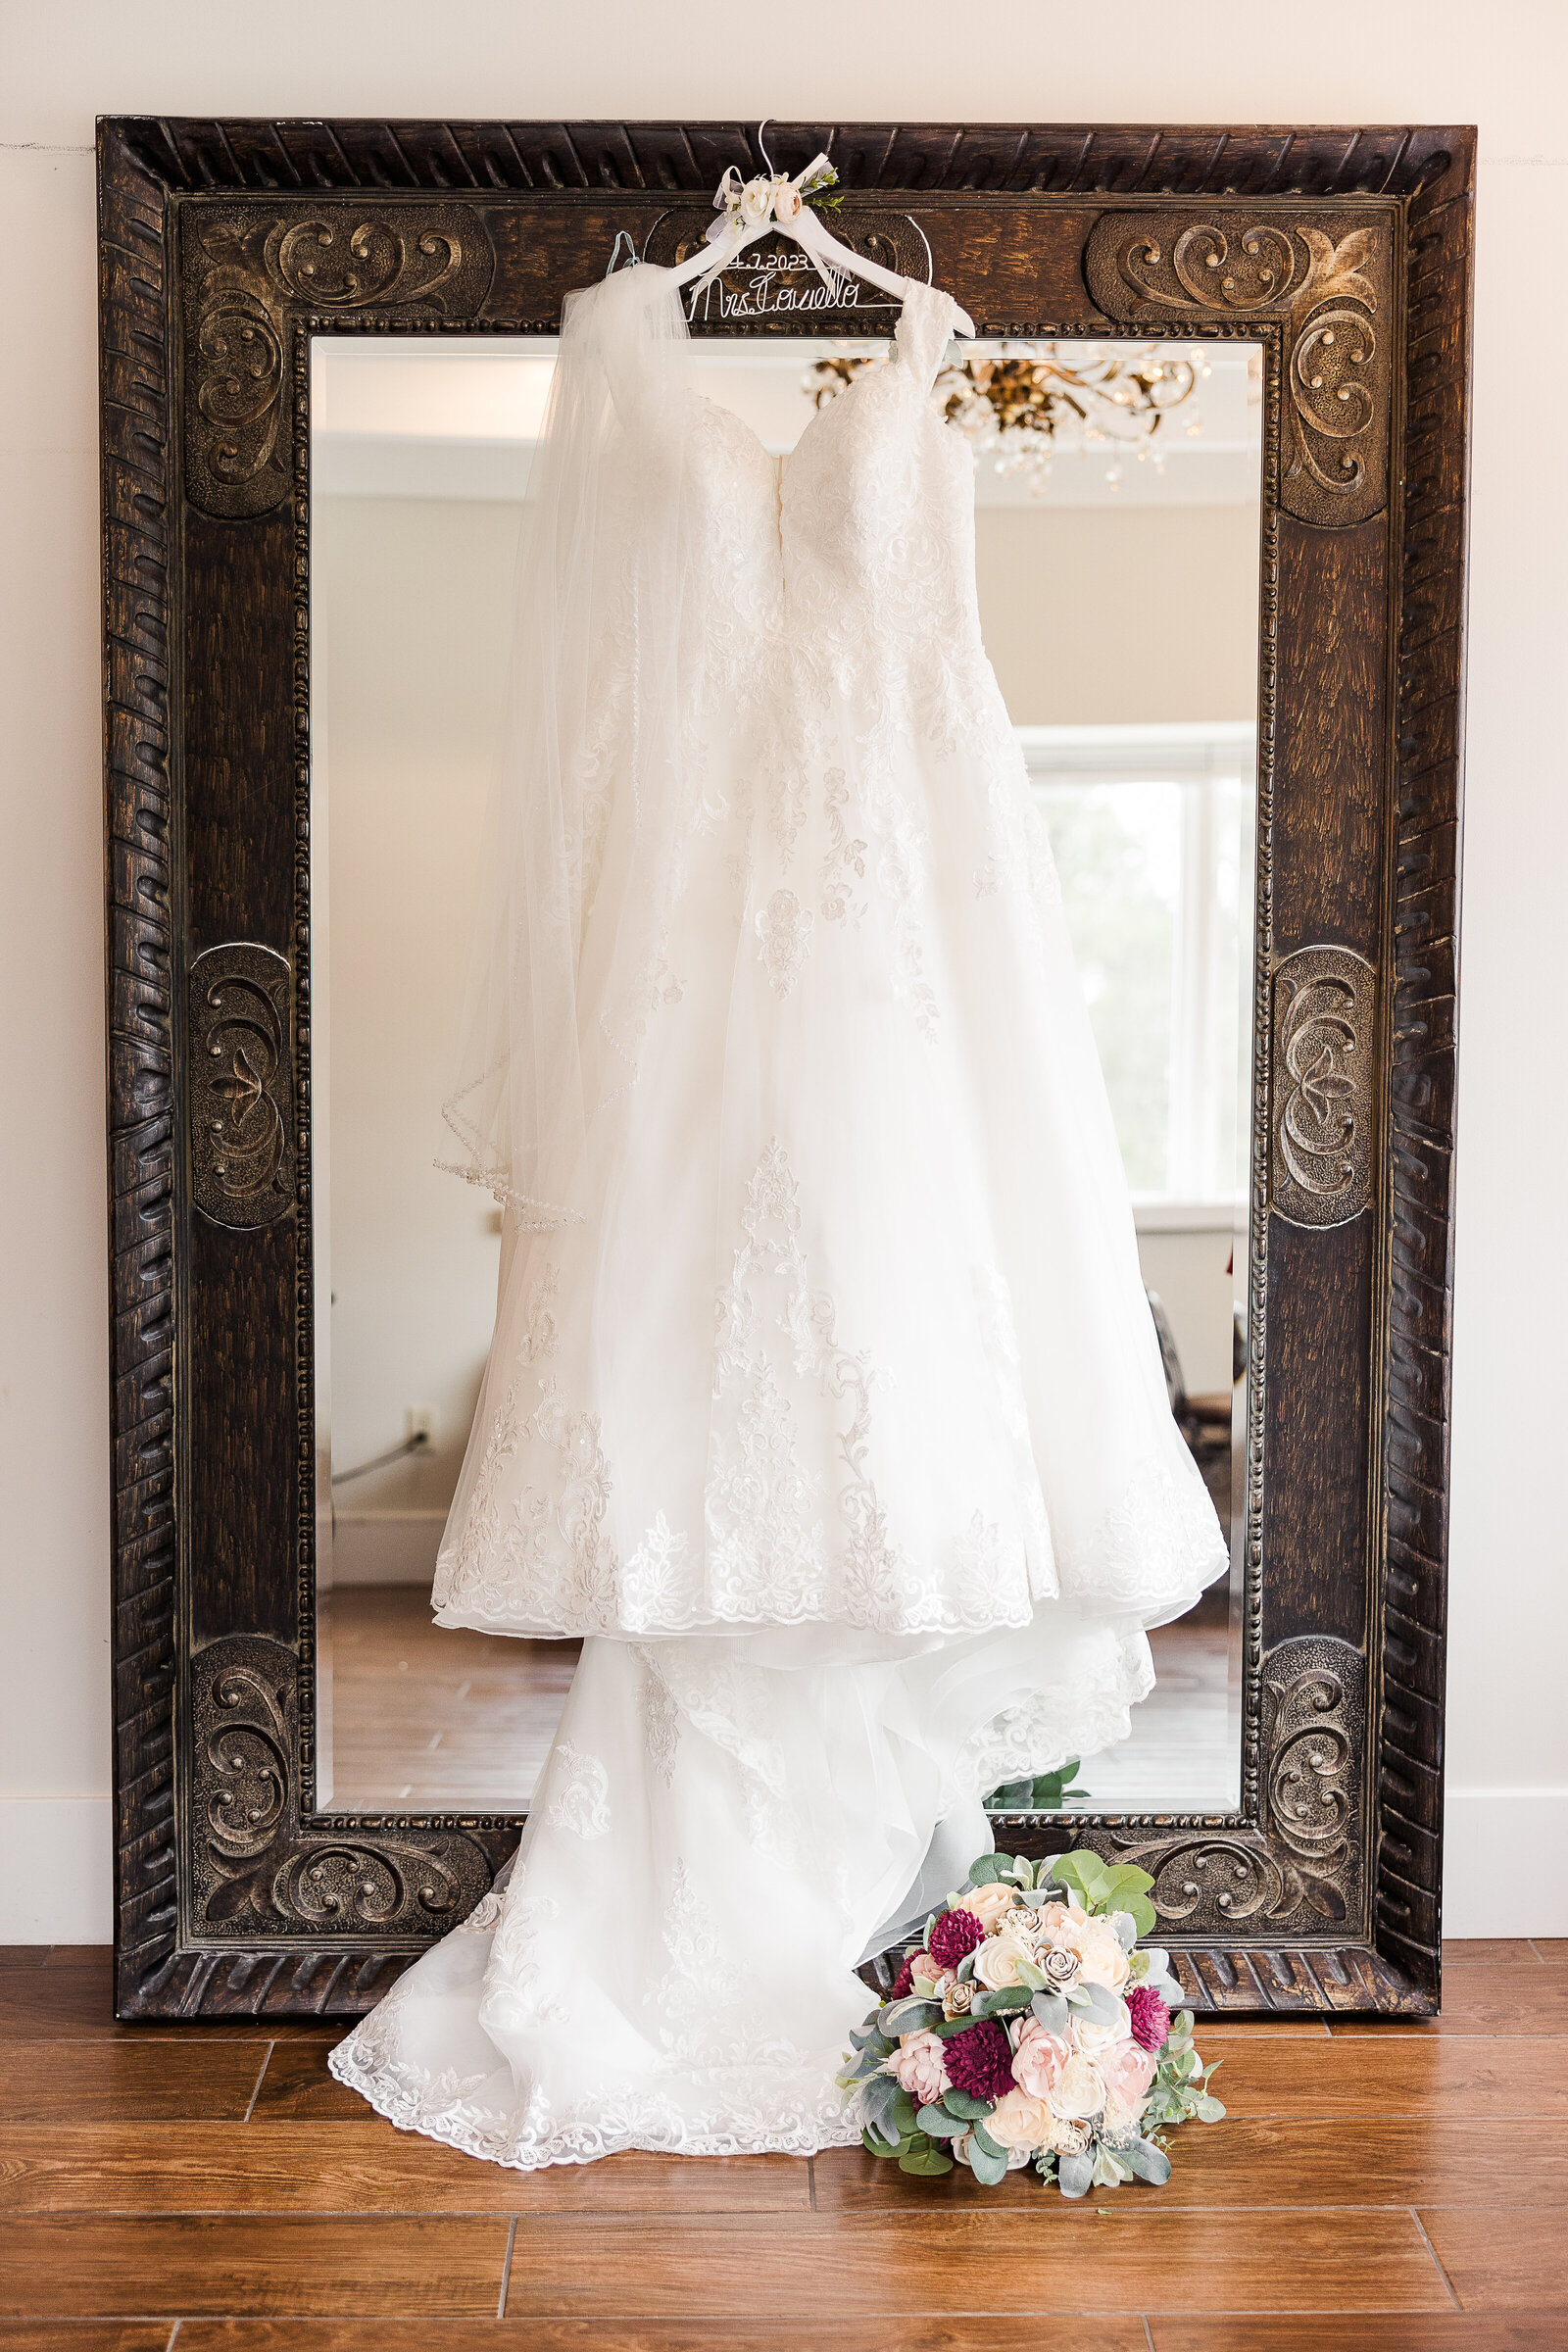 Wedding dress against large mirror with bridal bouquet